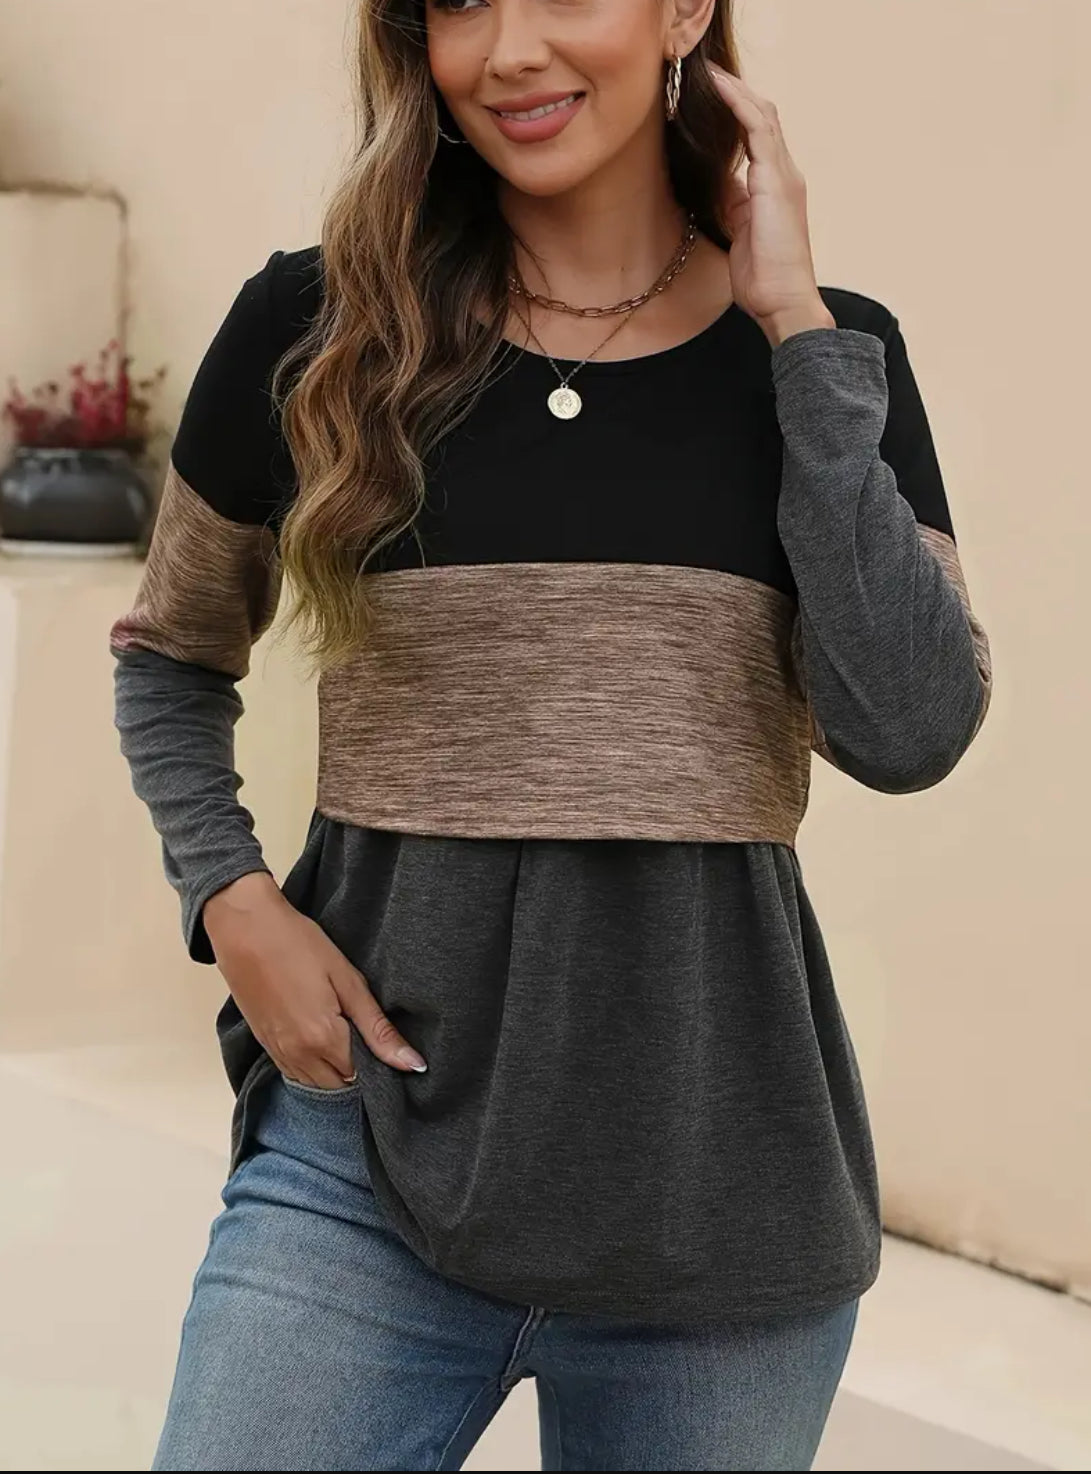 Women's Maternity Contrast Color T-shirt Long Sleeve Breast Feeding Tees, Baby 🌟🌙 Bumps Collection